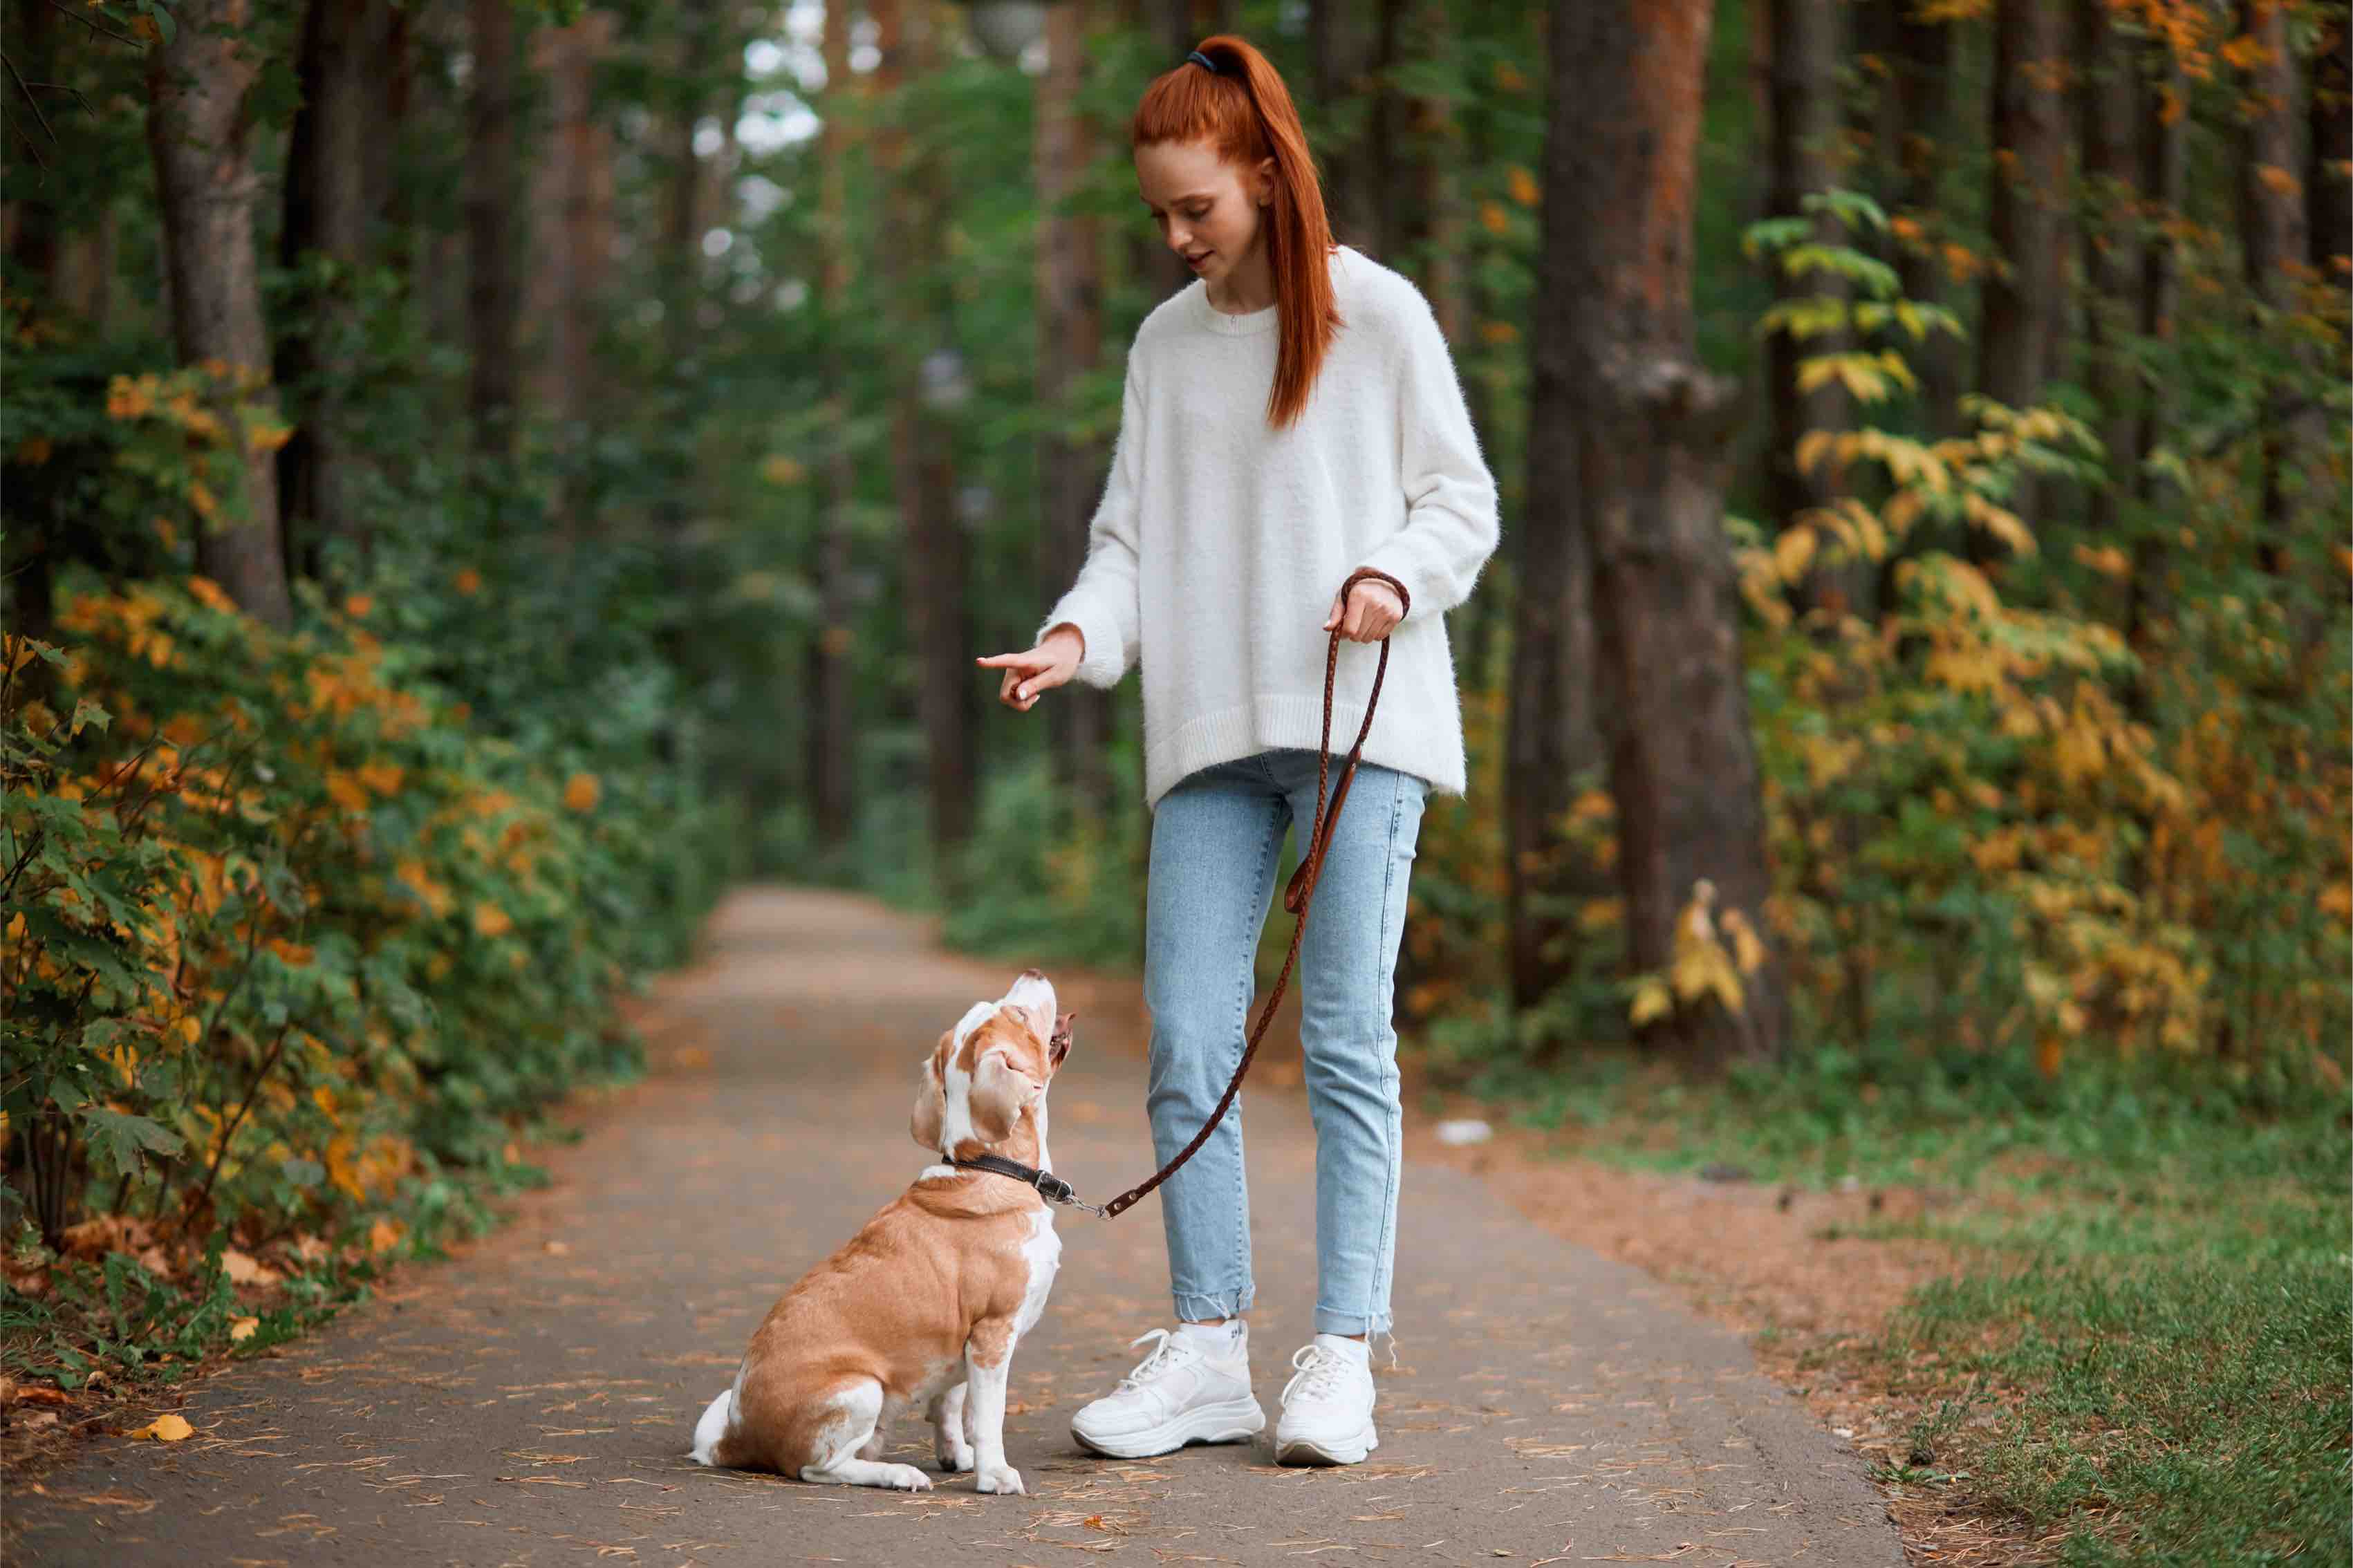 Girl and dog working on their Dog Training Elite in Atlanta training on a walk in the park.